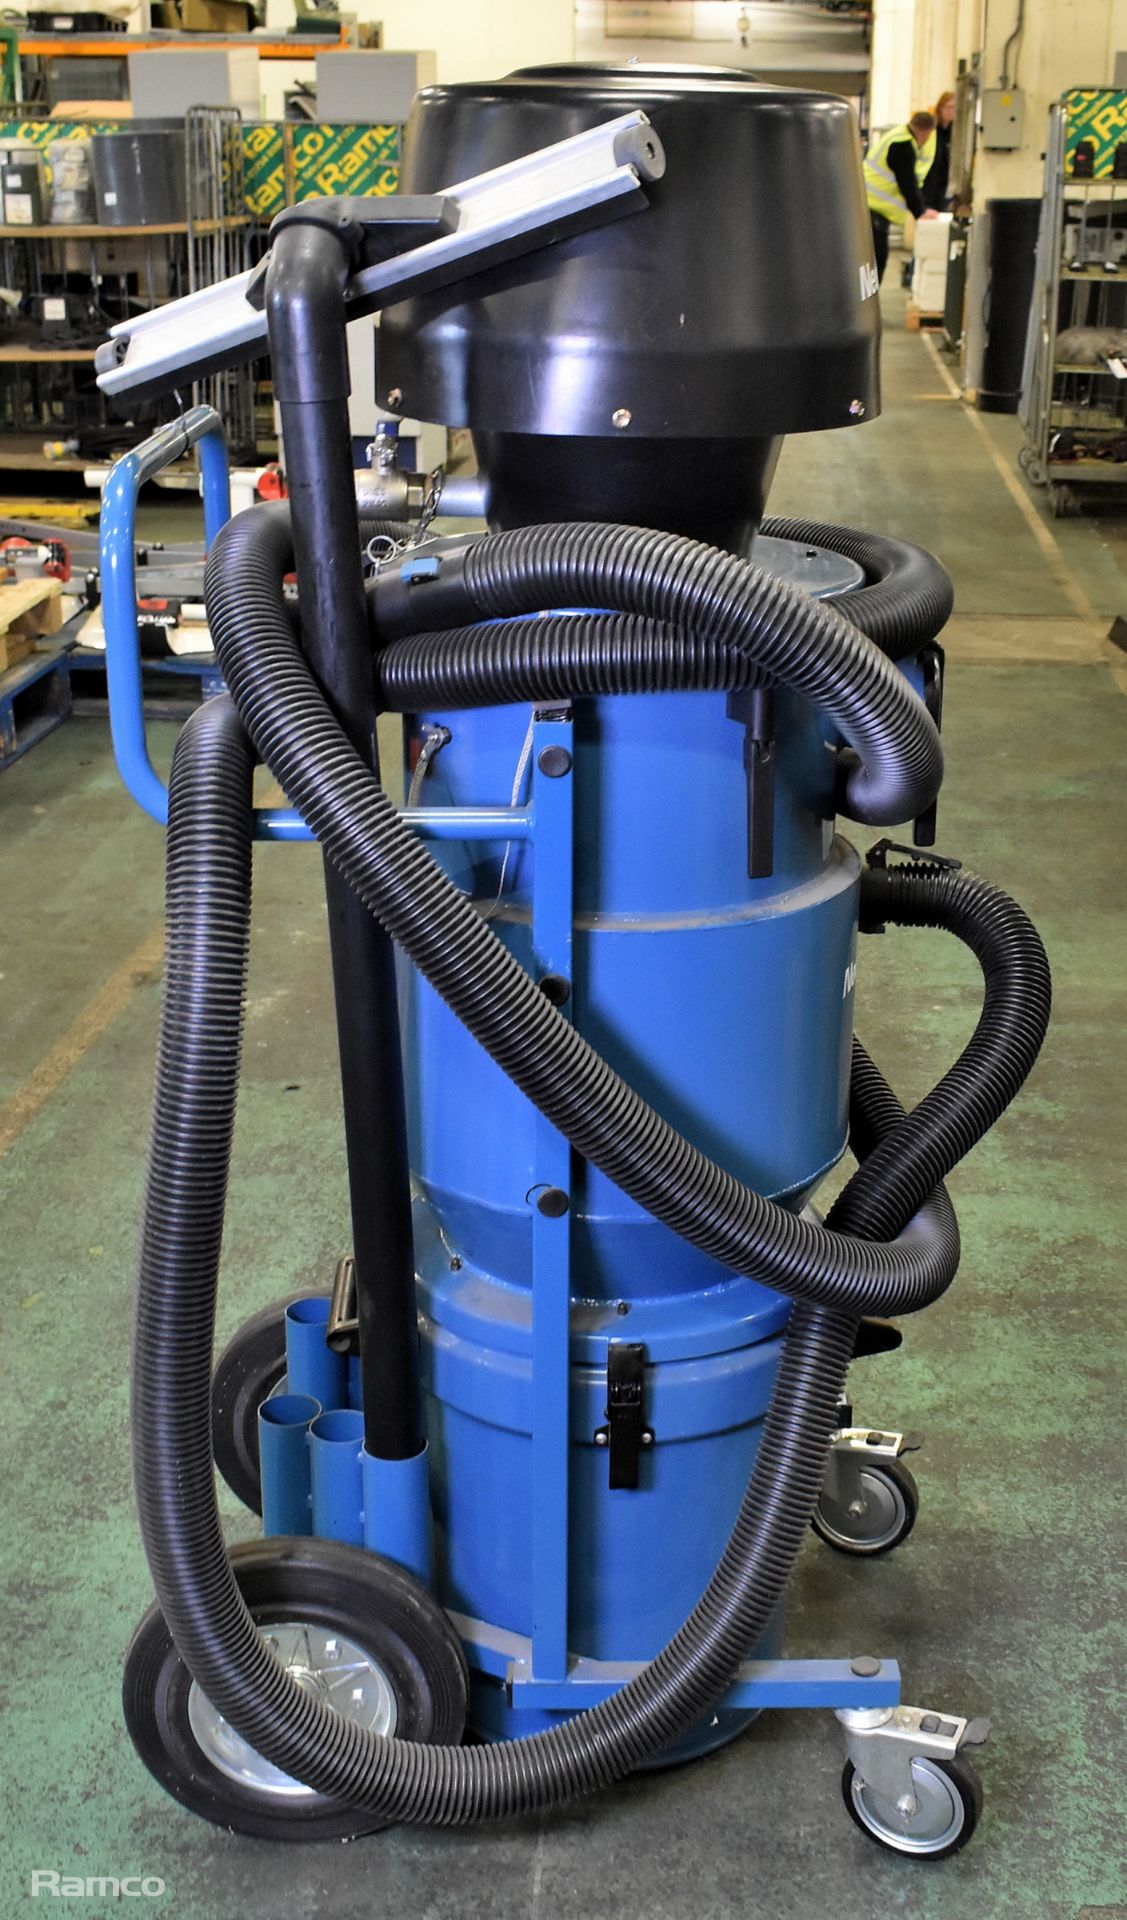 Nederman 216A industrial mobile vacuum cleaner - 8 bar - Image 6 of 6